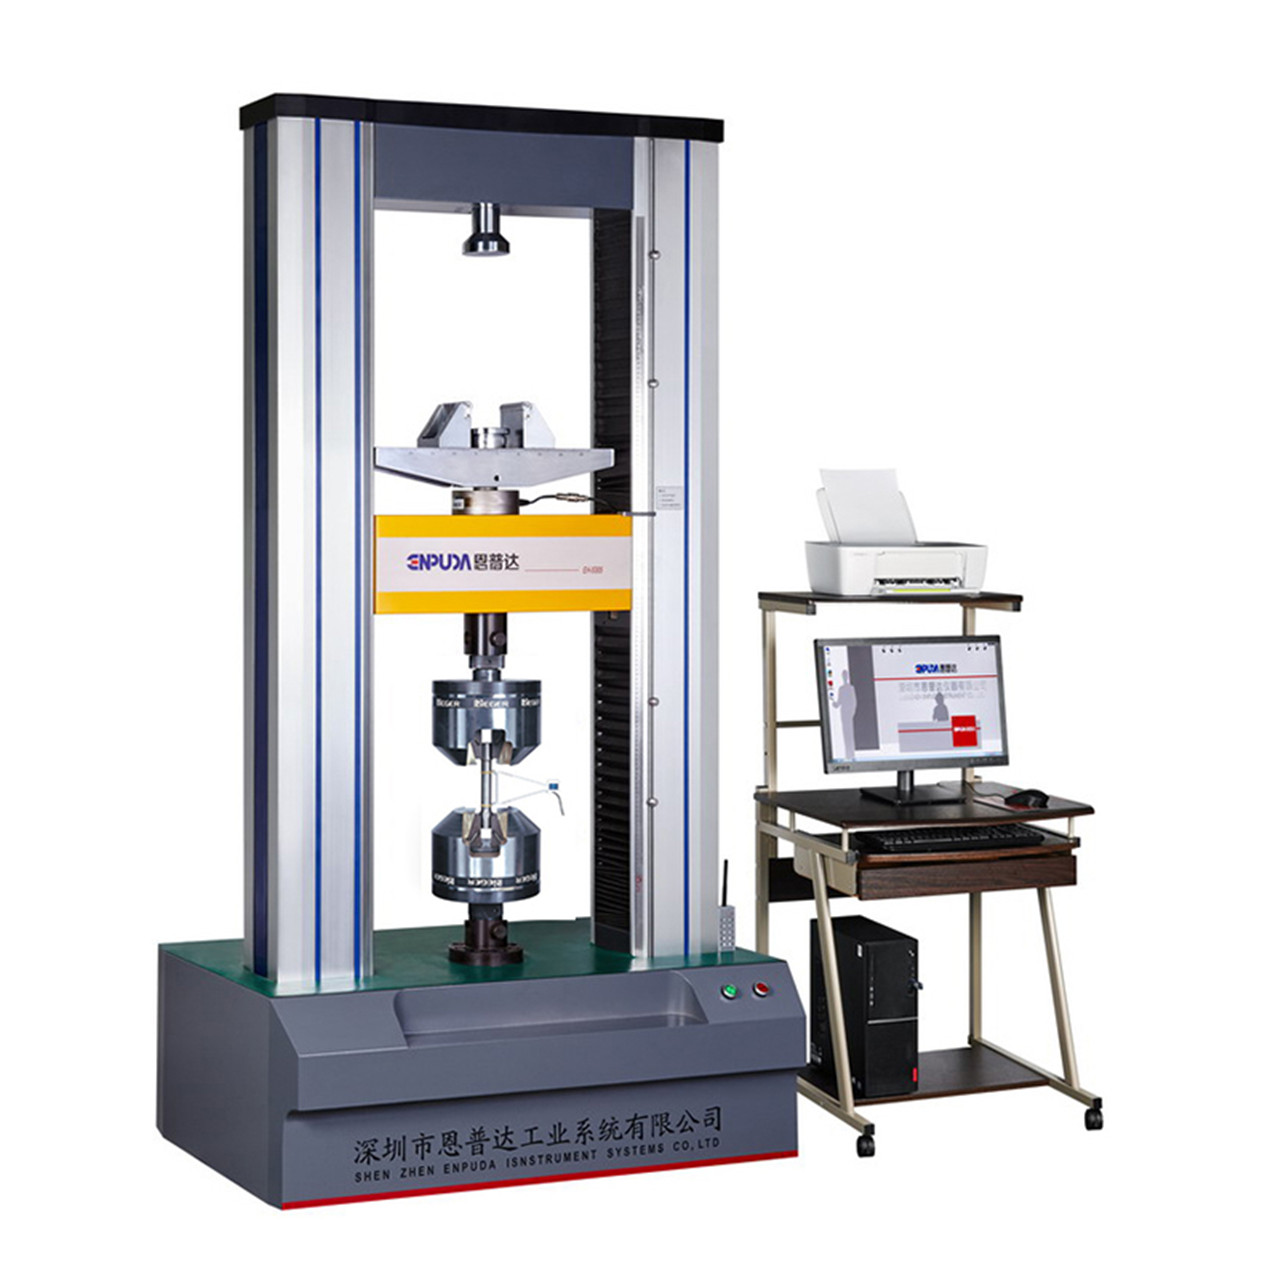 https://www.epd-instrument.com/high-and-low-temperatur-electronic-universal-test-machine-produkt/